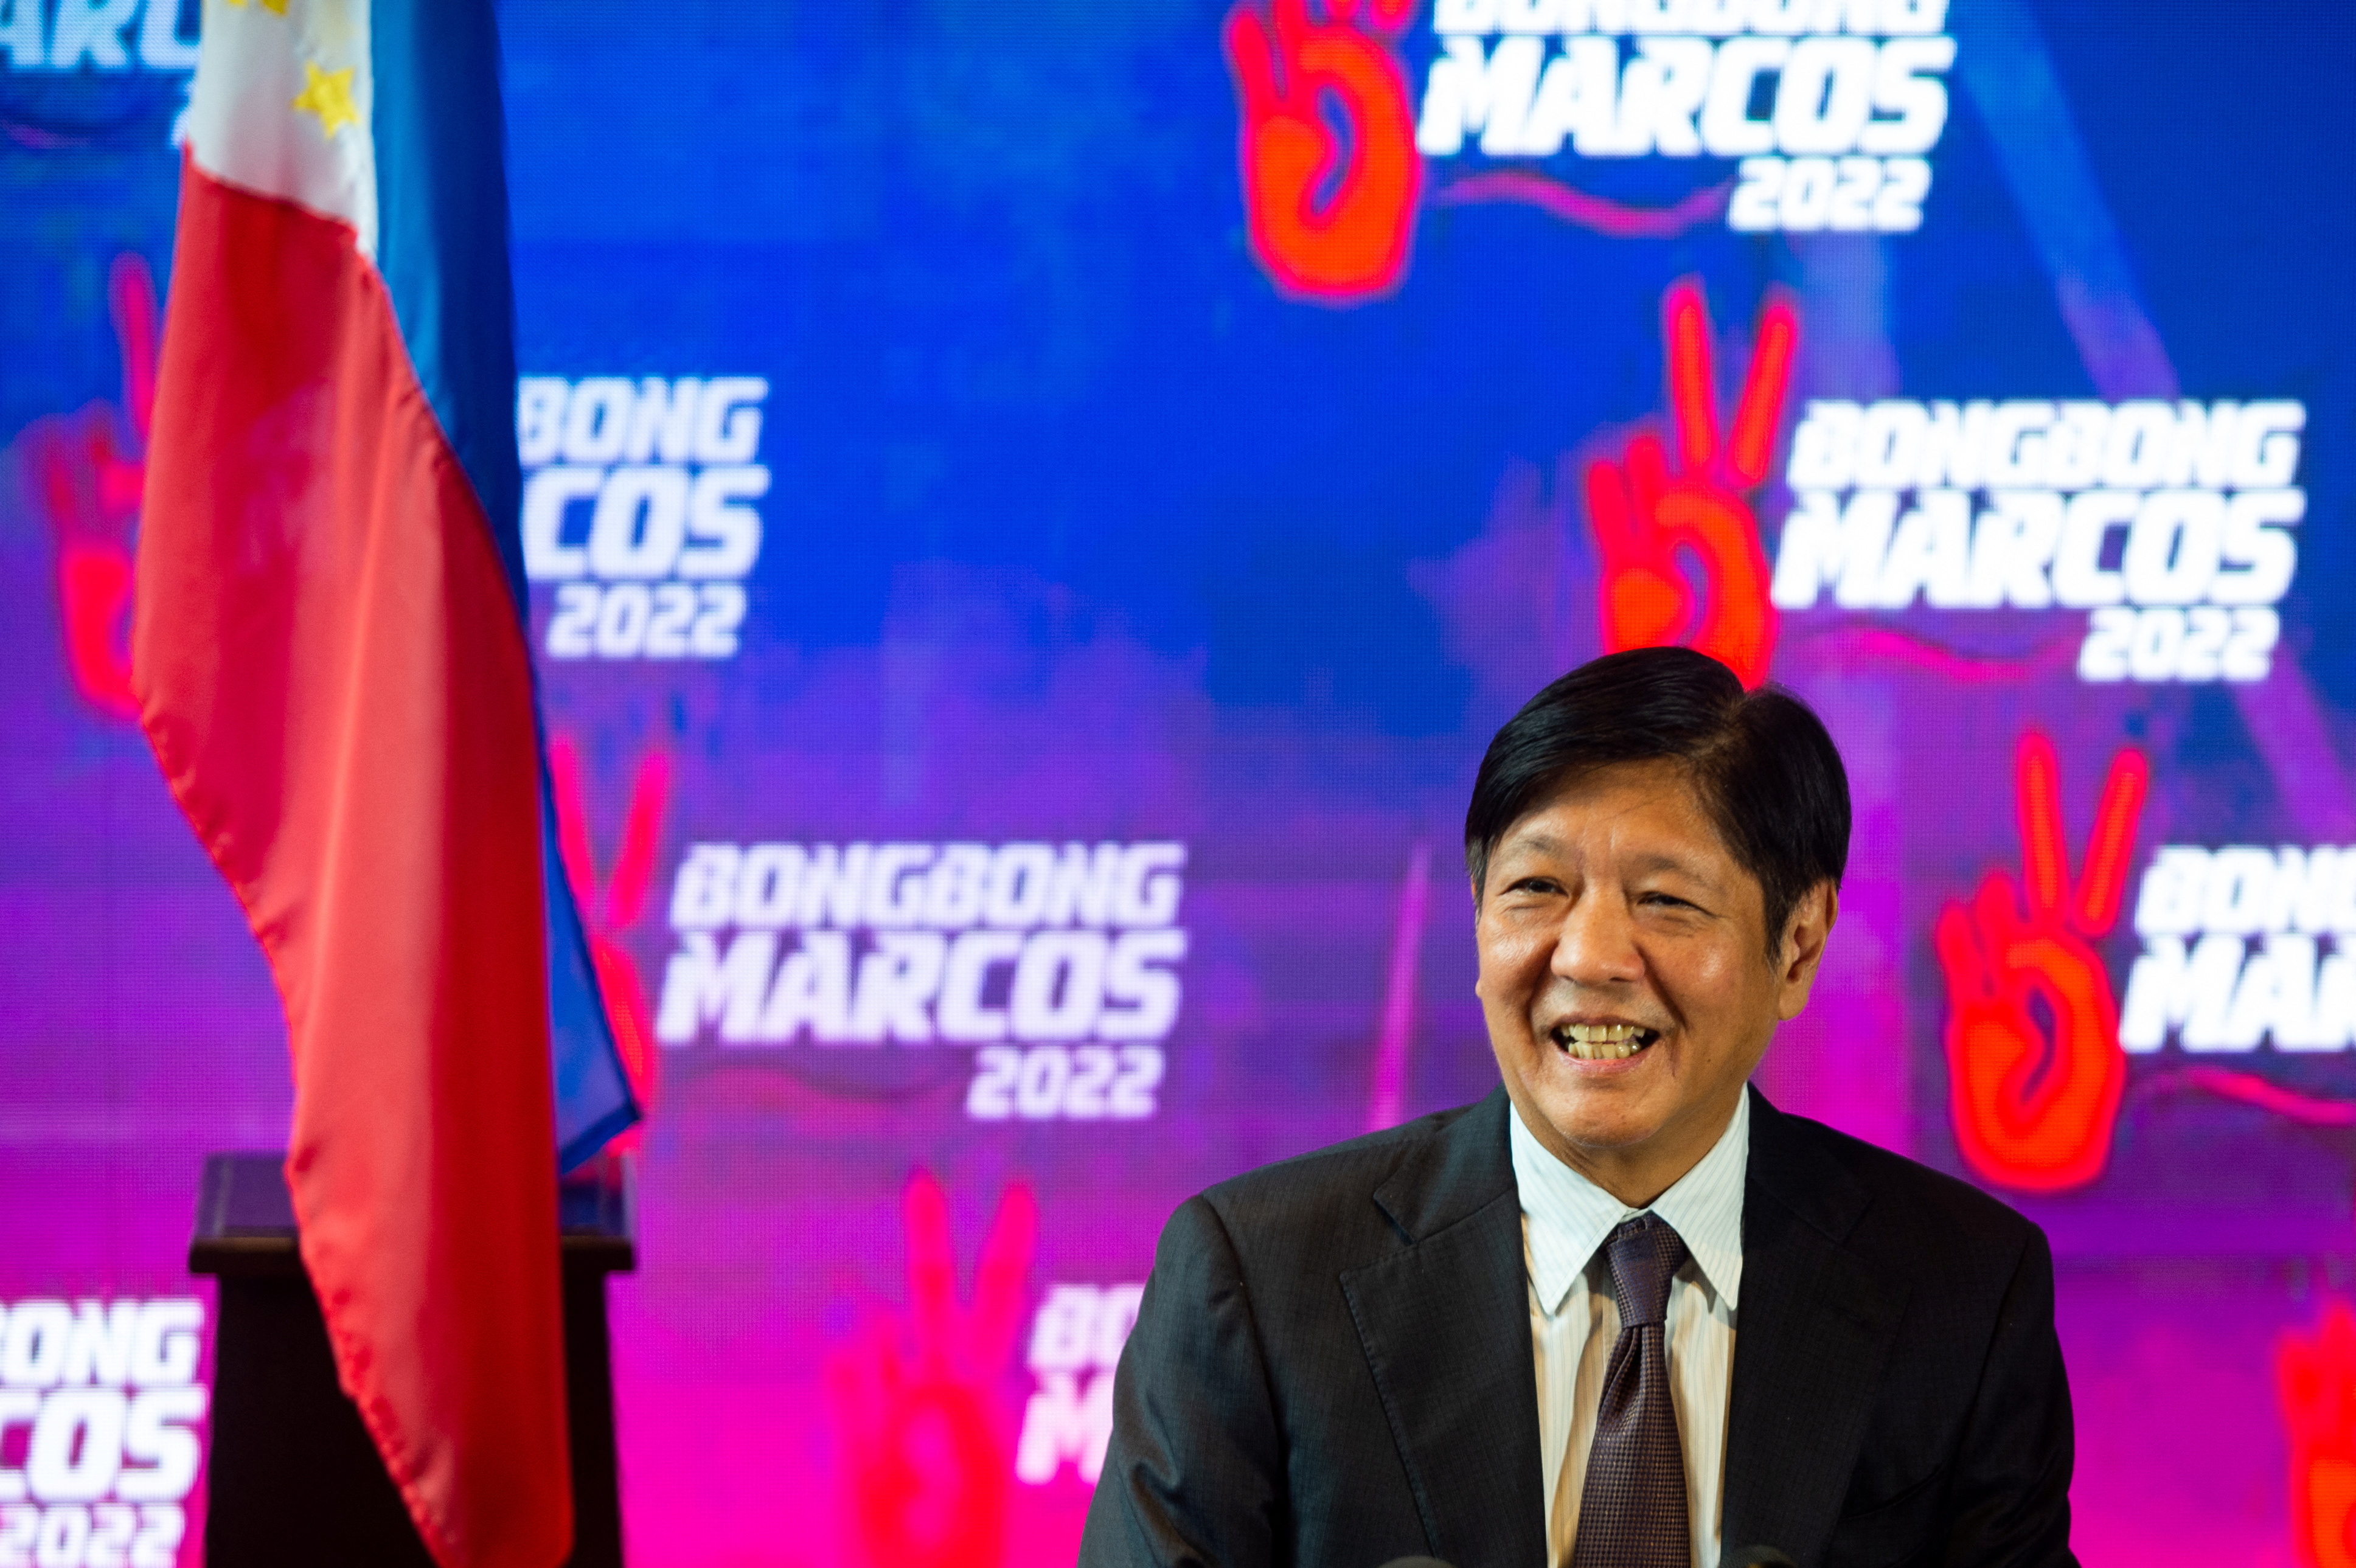 LIST: Who are Bongbong Marcos' appointees?